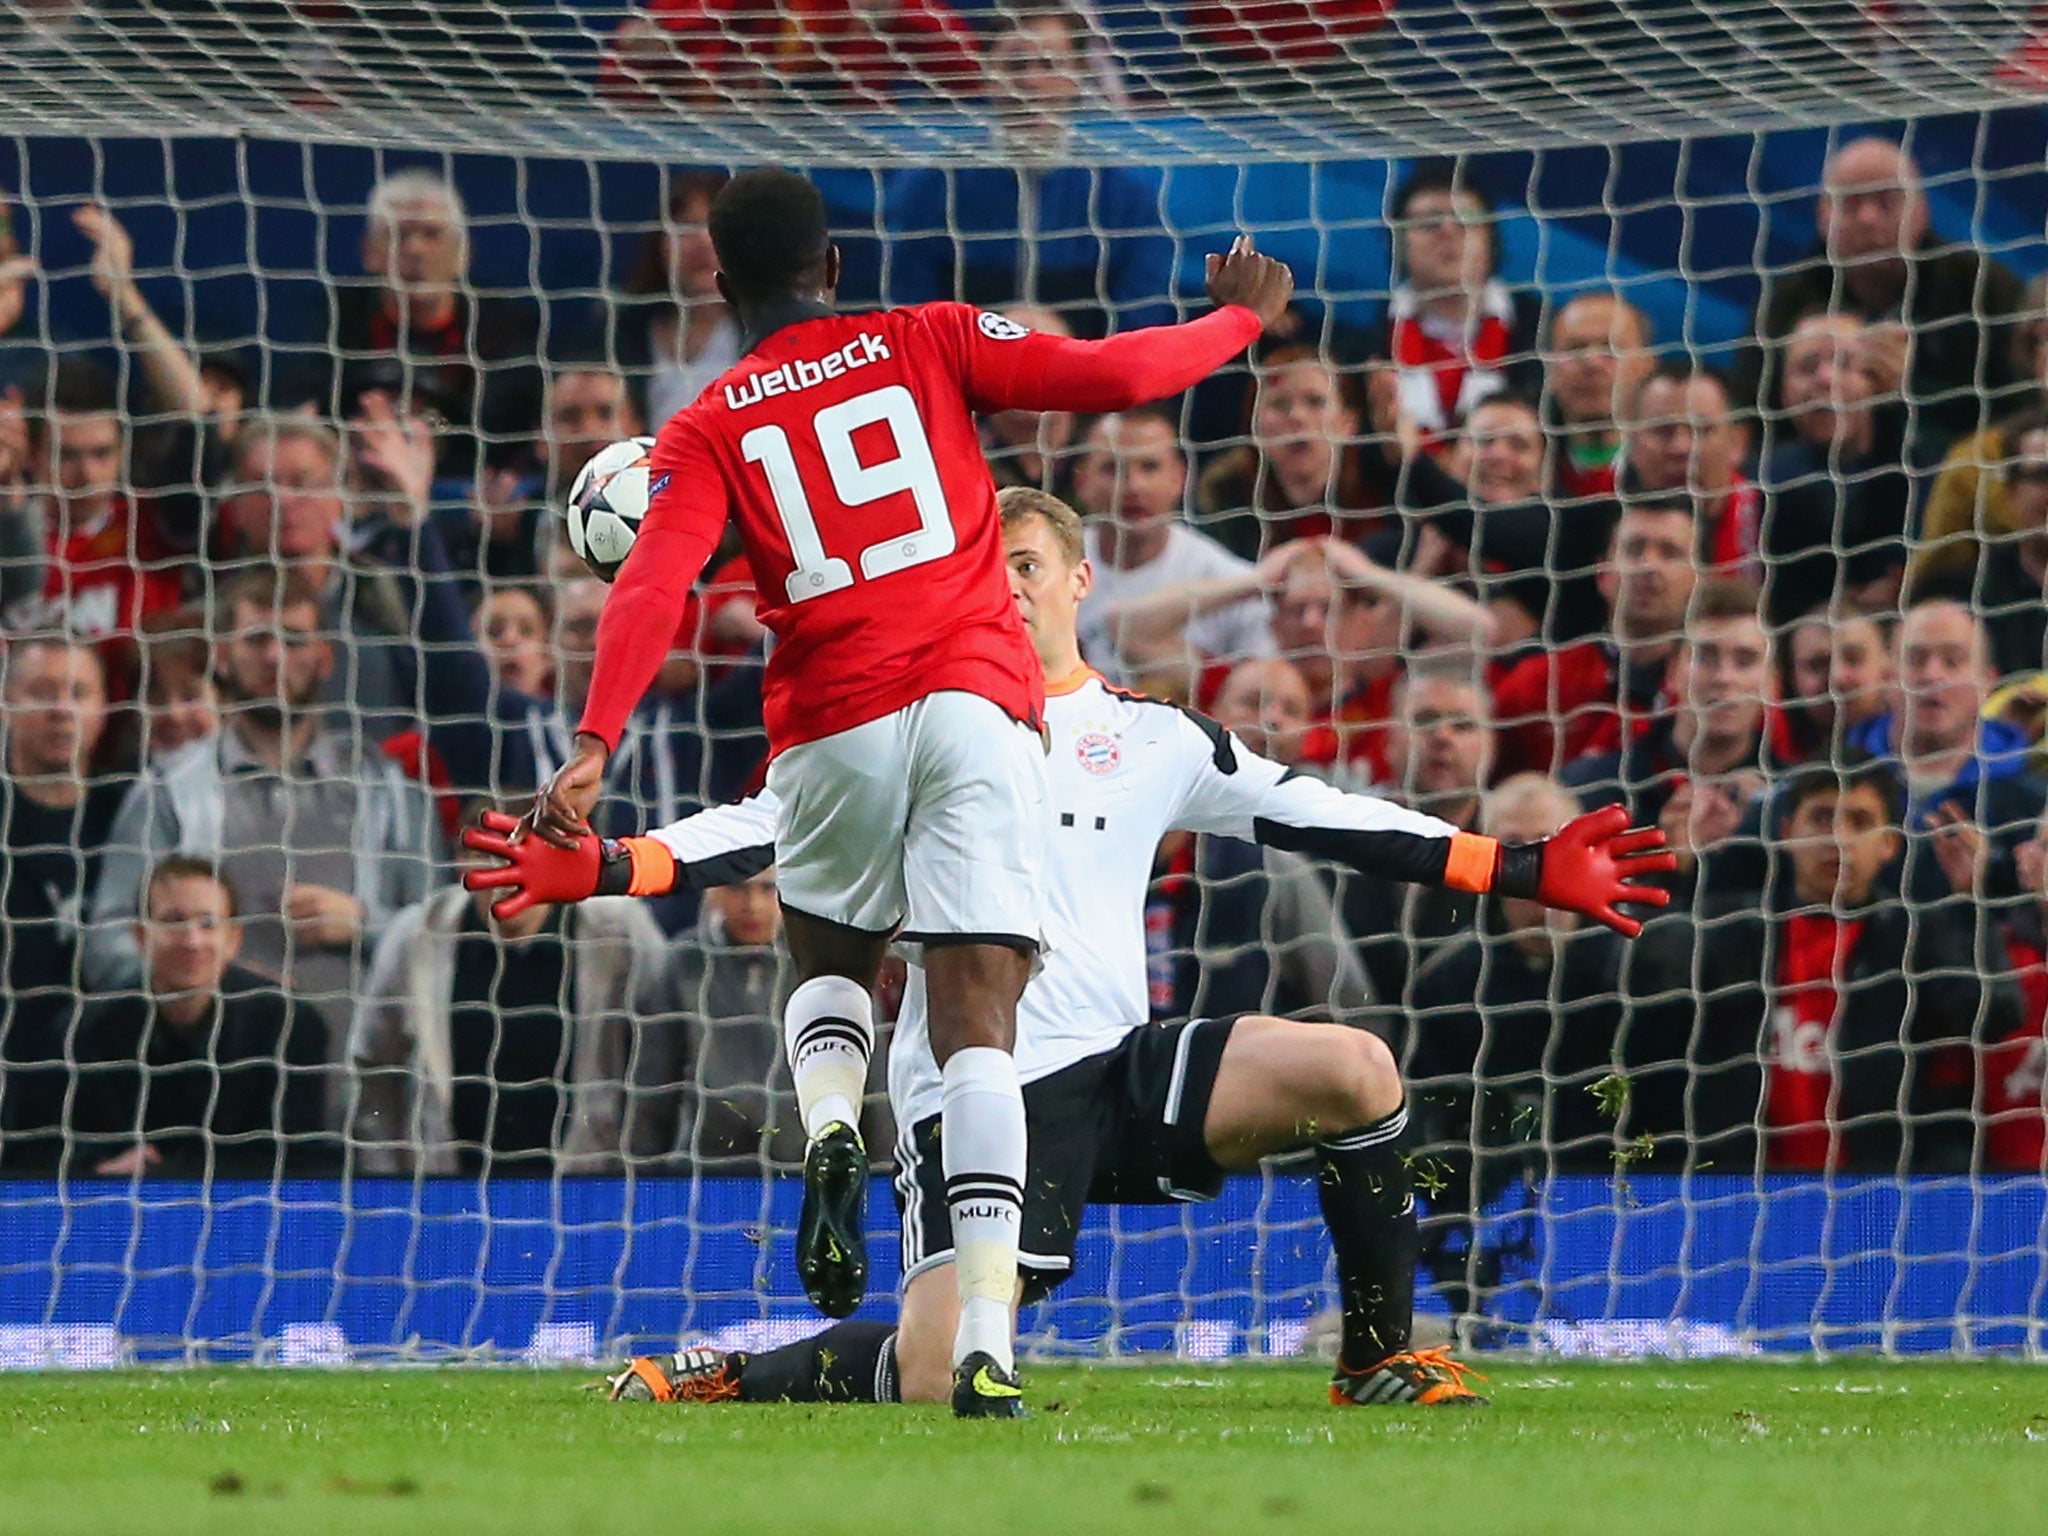 Danny Welbeck sees his chip saved by Manuel Neuer